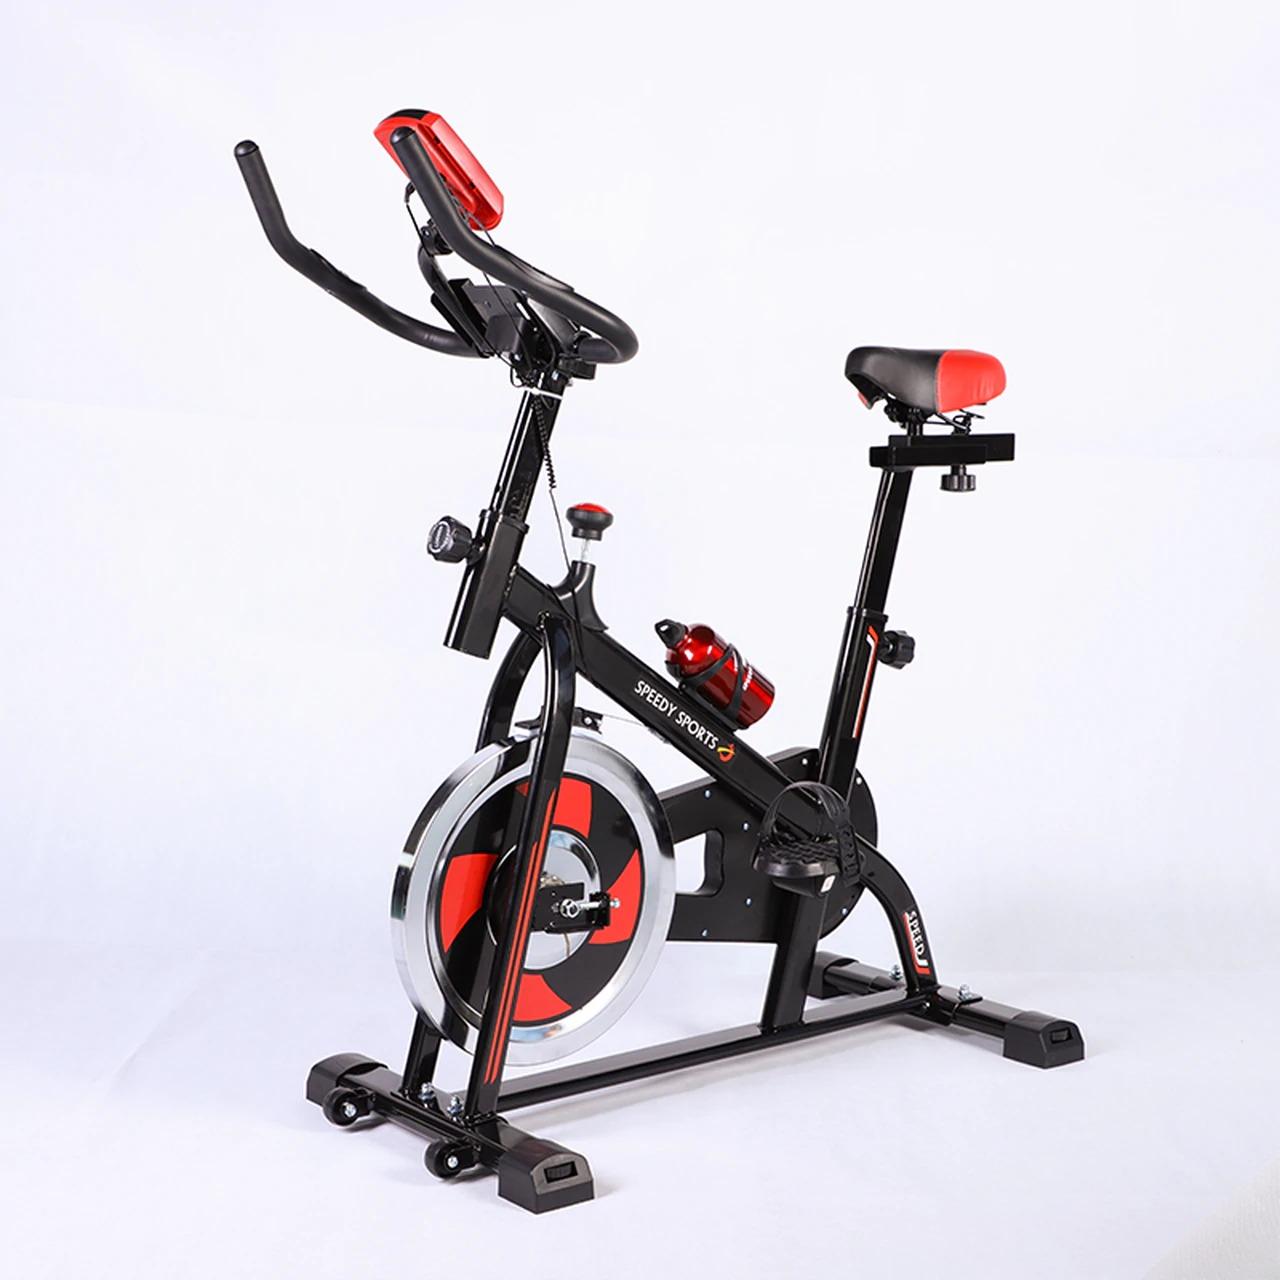 PRO Indoor Training Fitness Exercise Bike Cycle Home Gym 10KG Spinning Flywheel 